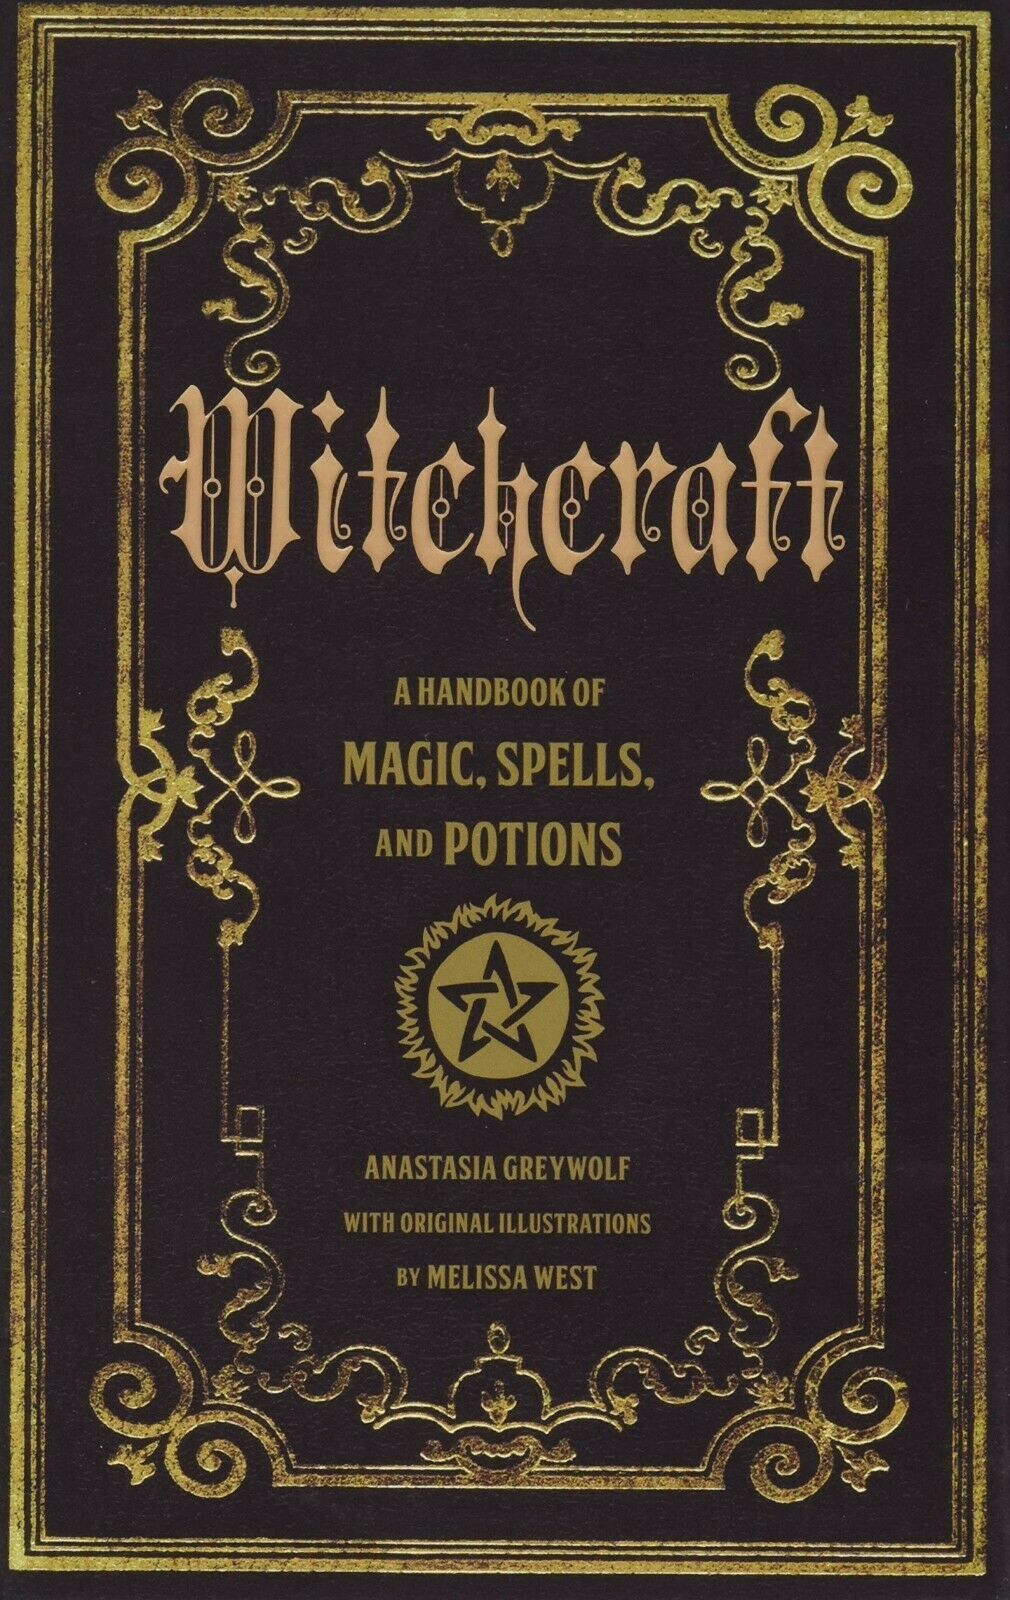 magic spells and potions that really works